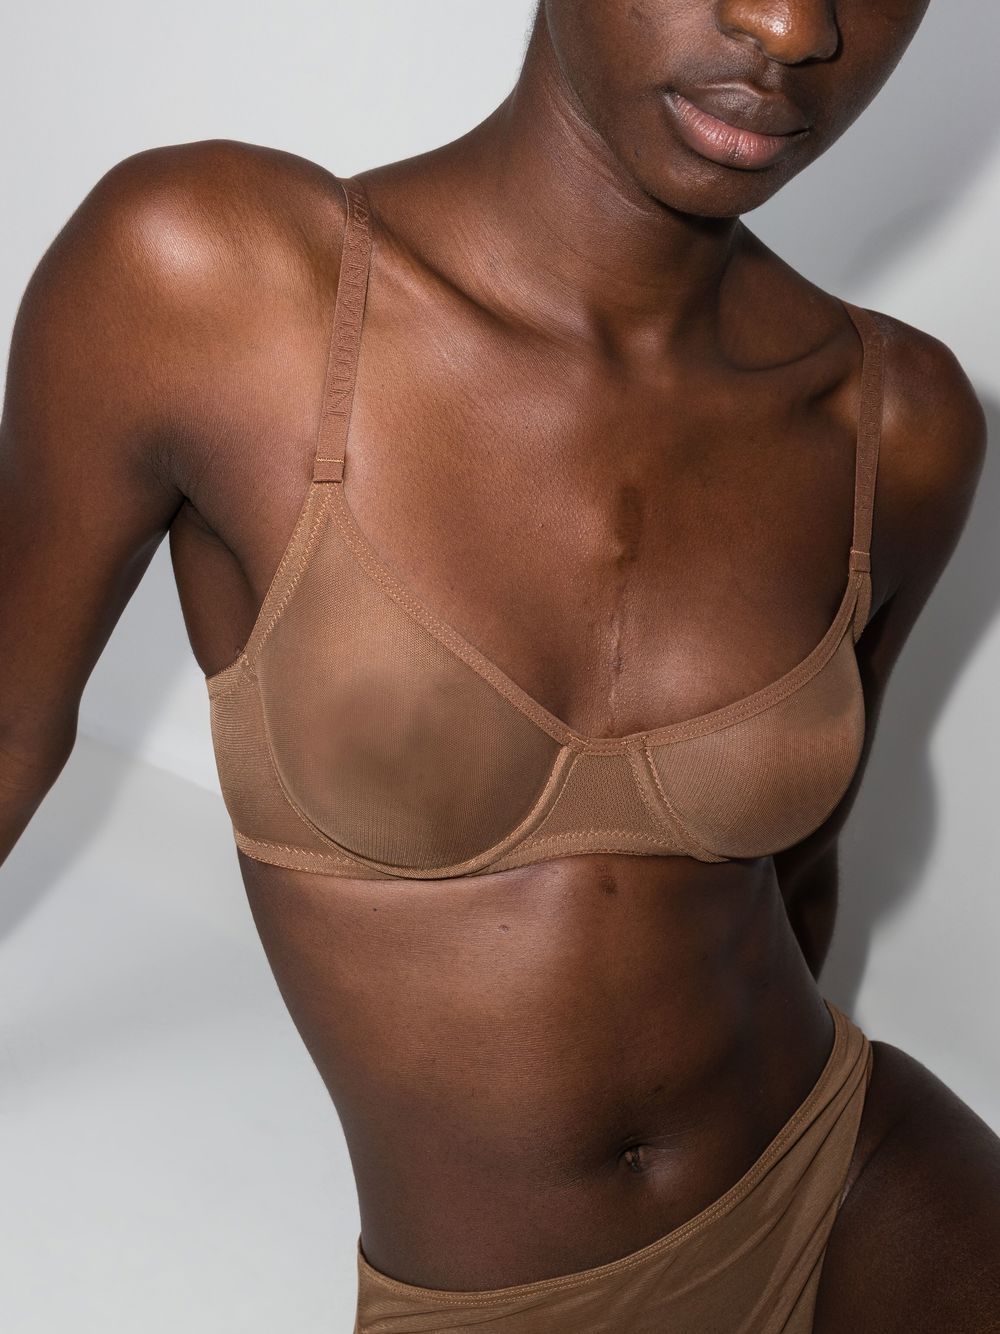 13 Lingerie Brands With Bras For All Skin Tones